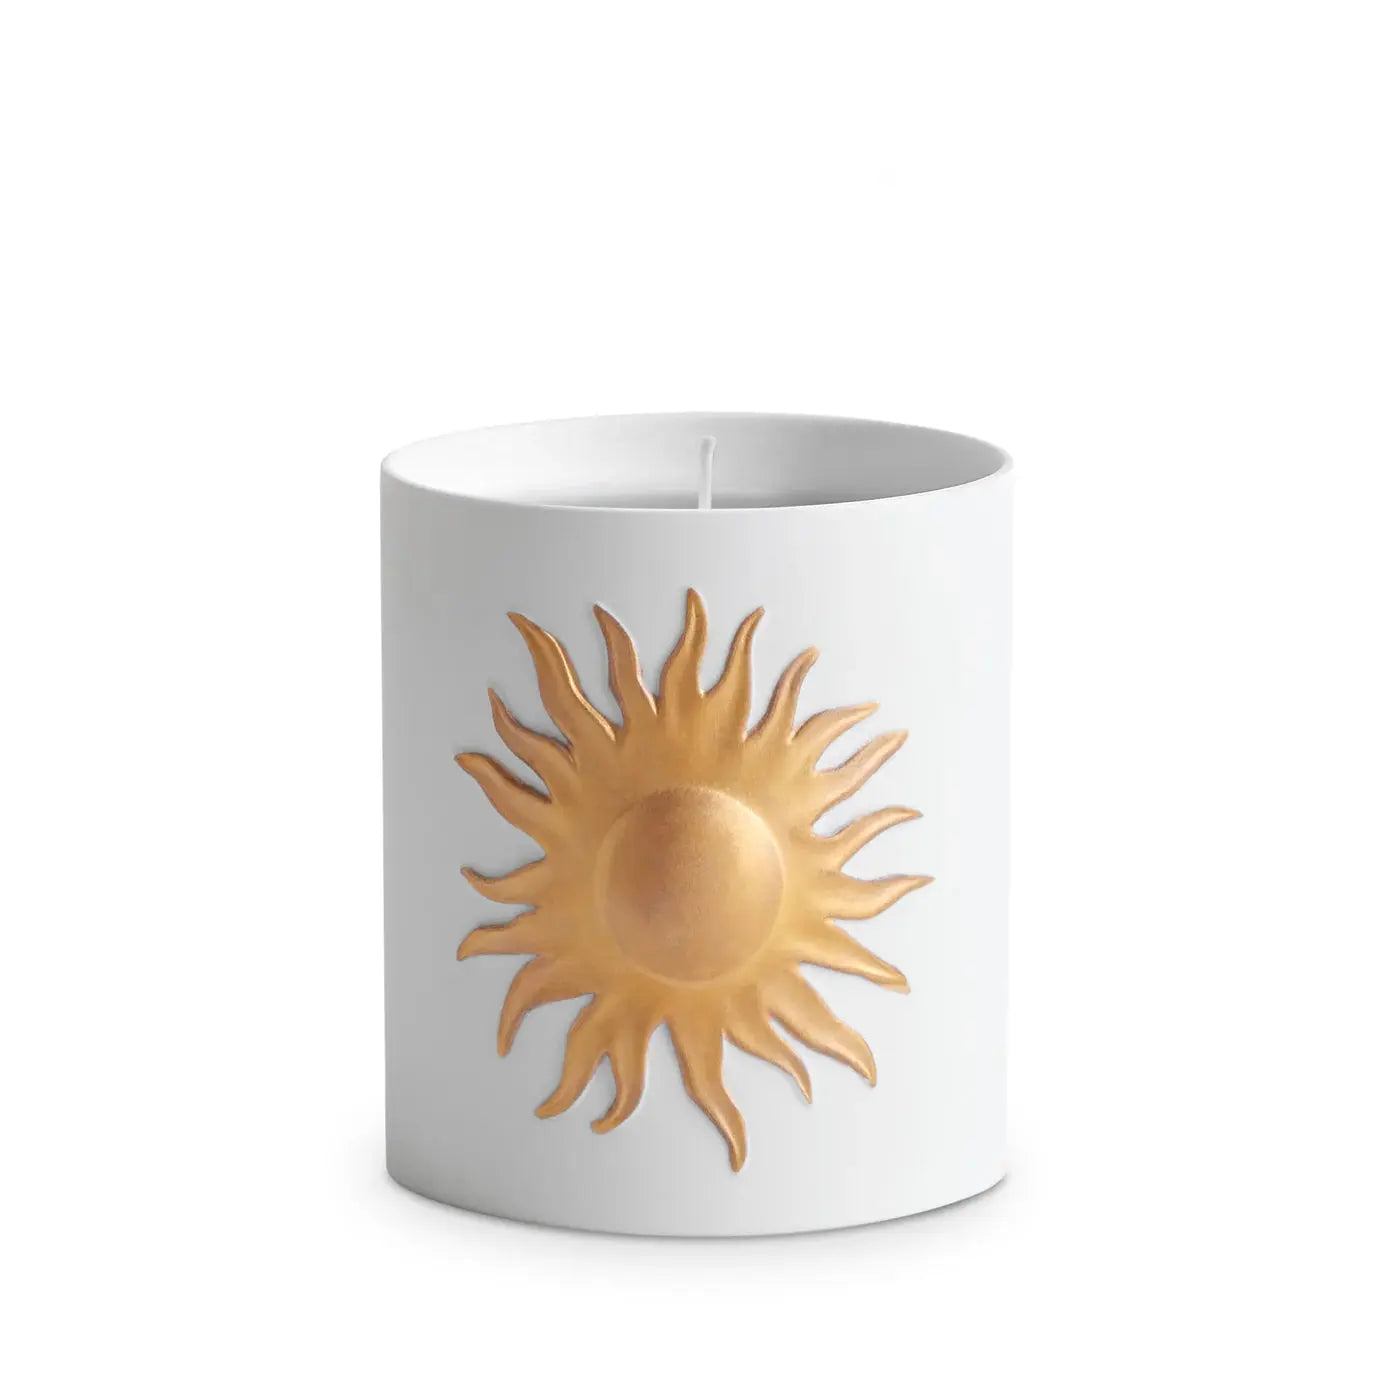 The Soleil Candle object